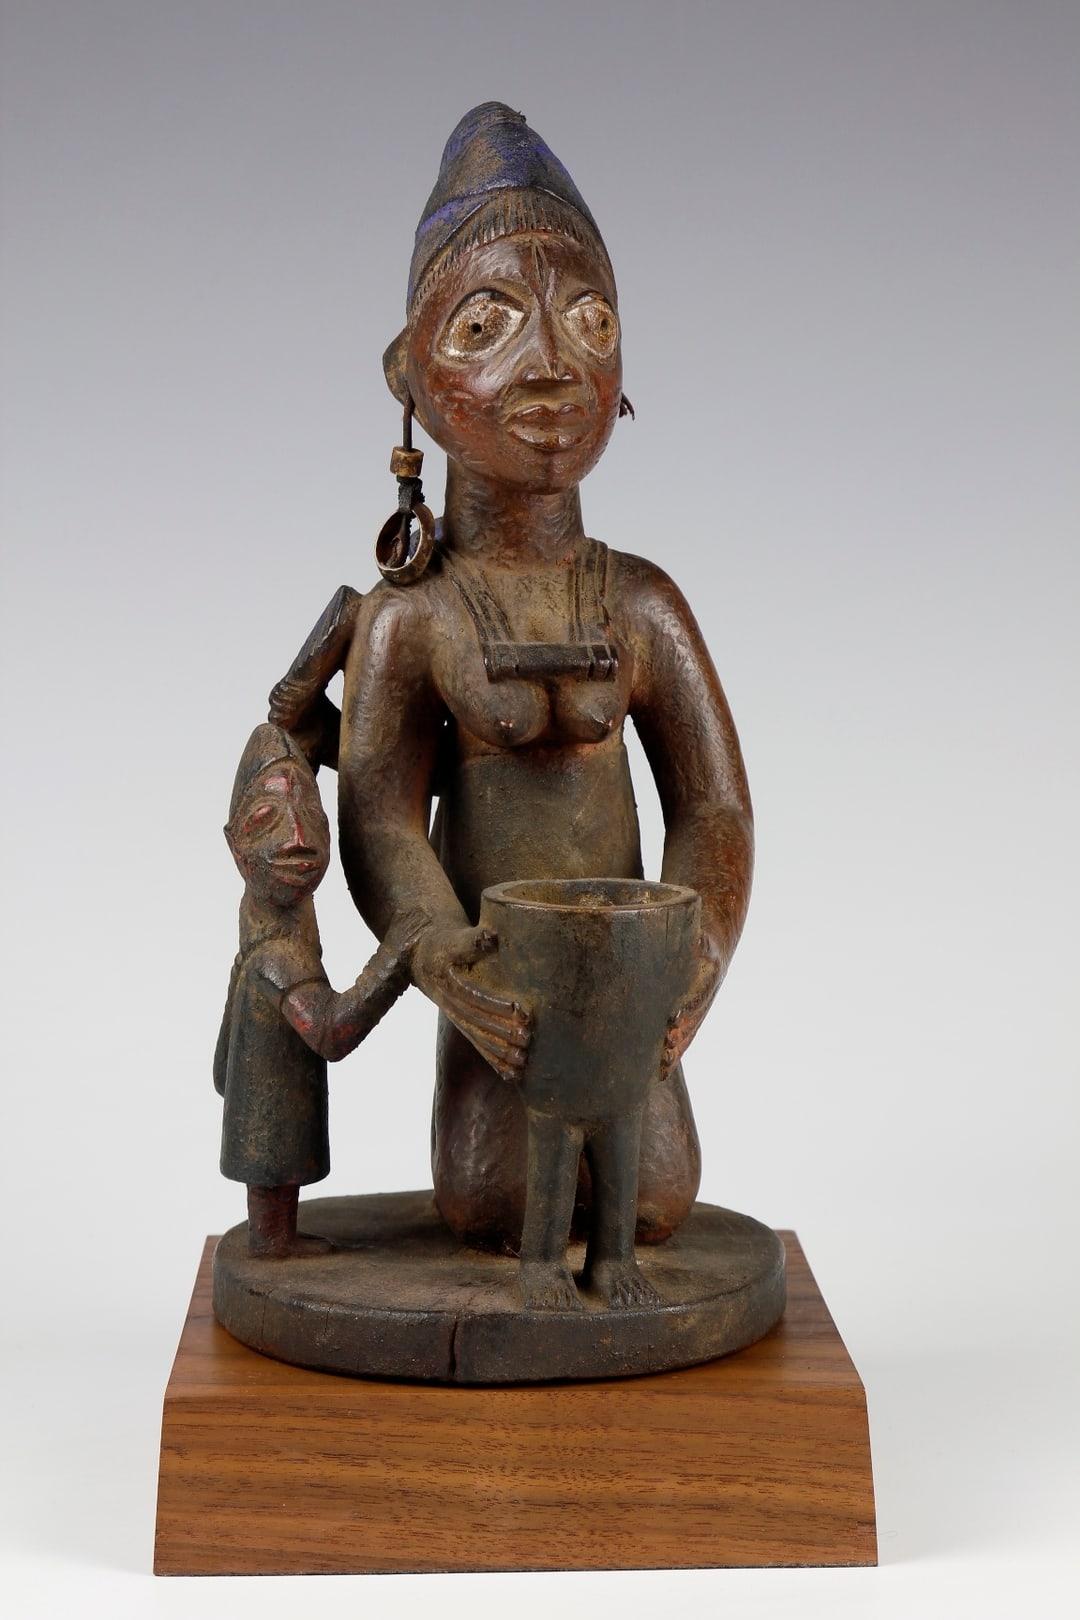 in africa figurative sculpture has been made